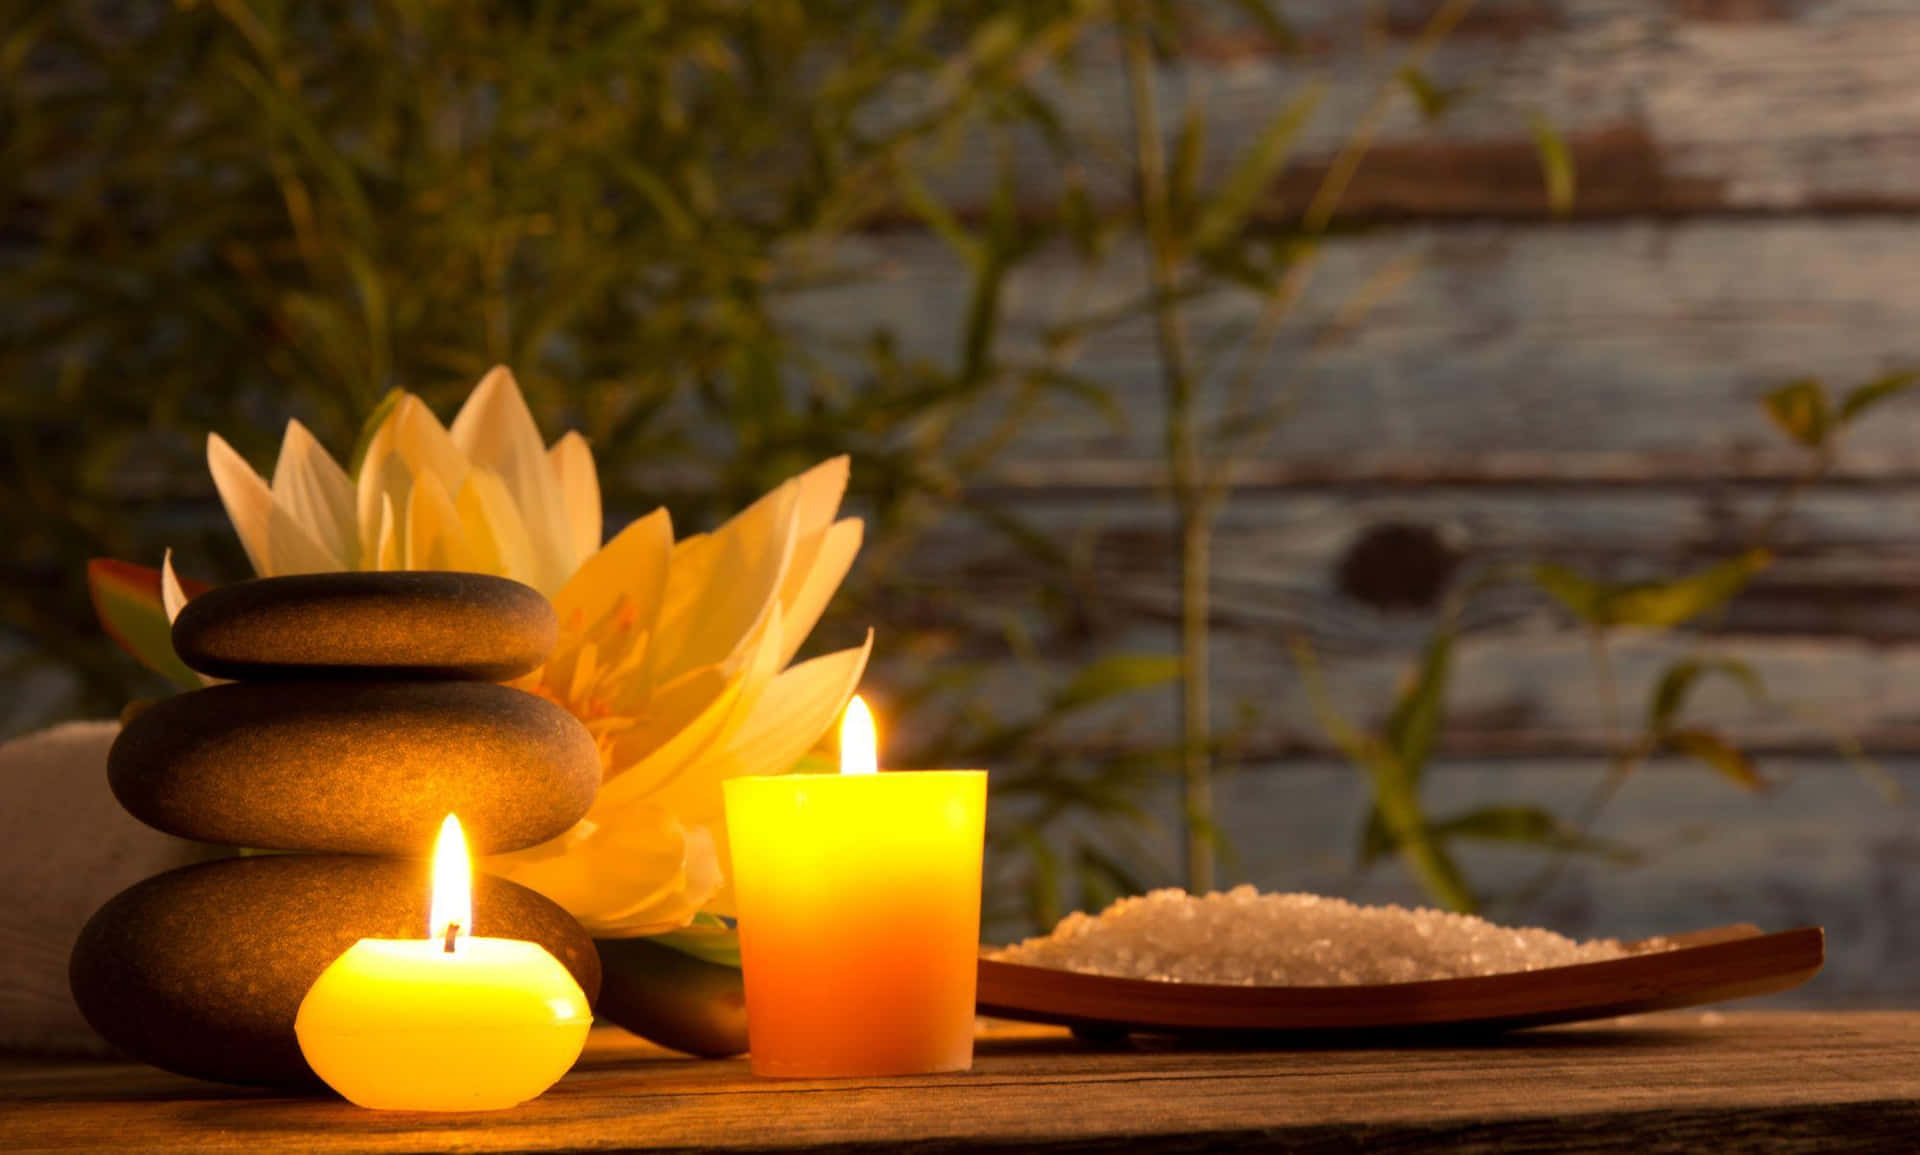 Tranquil Spa Settingwith Candlesand Stones Wallpaper